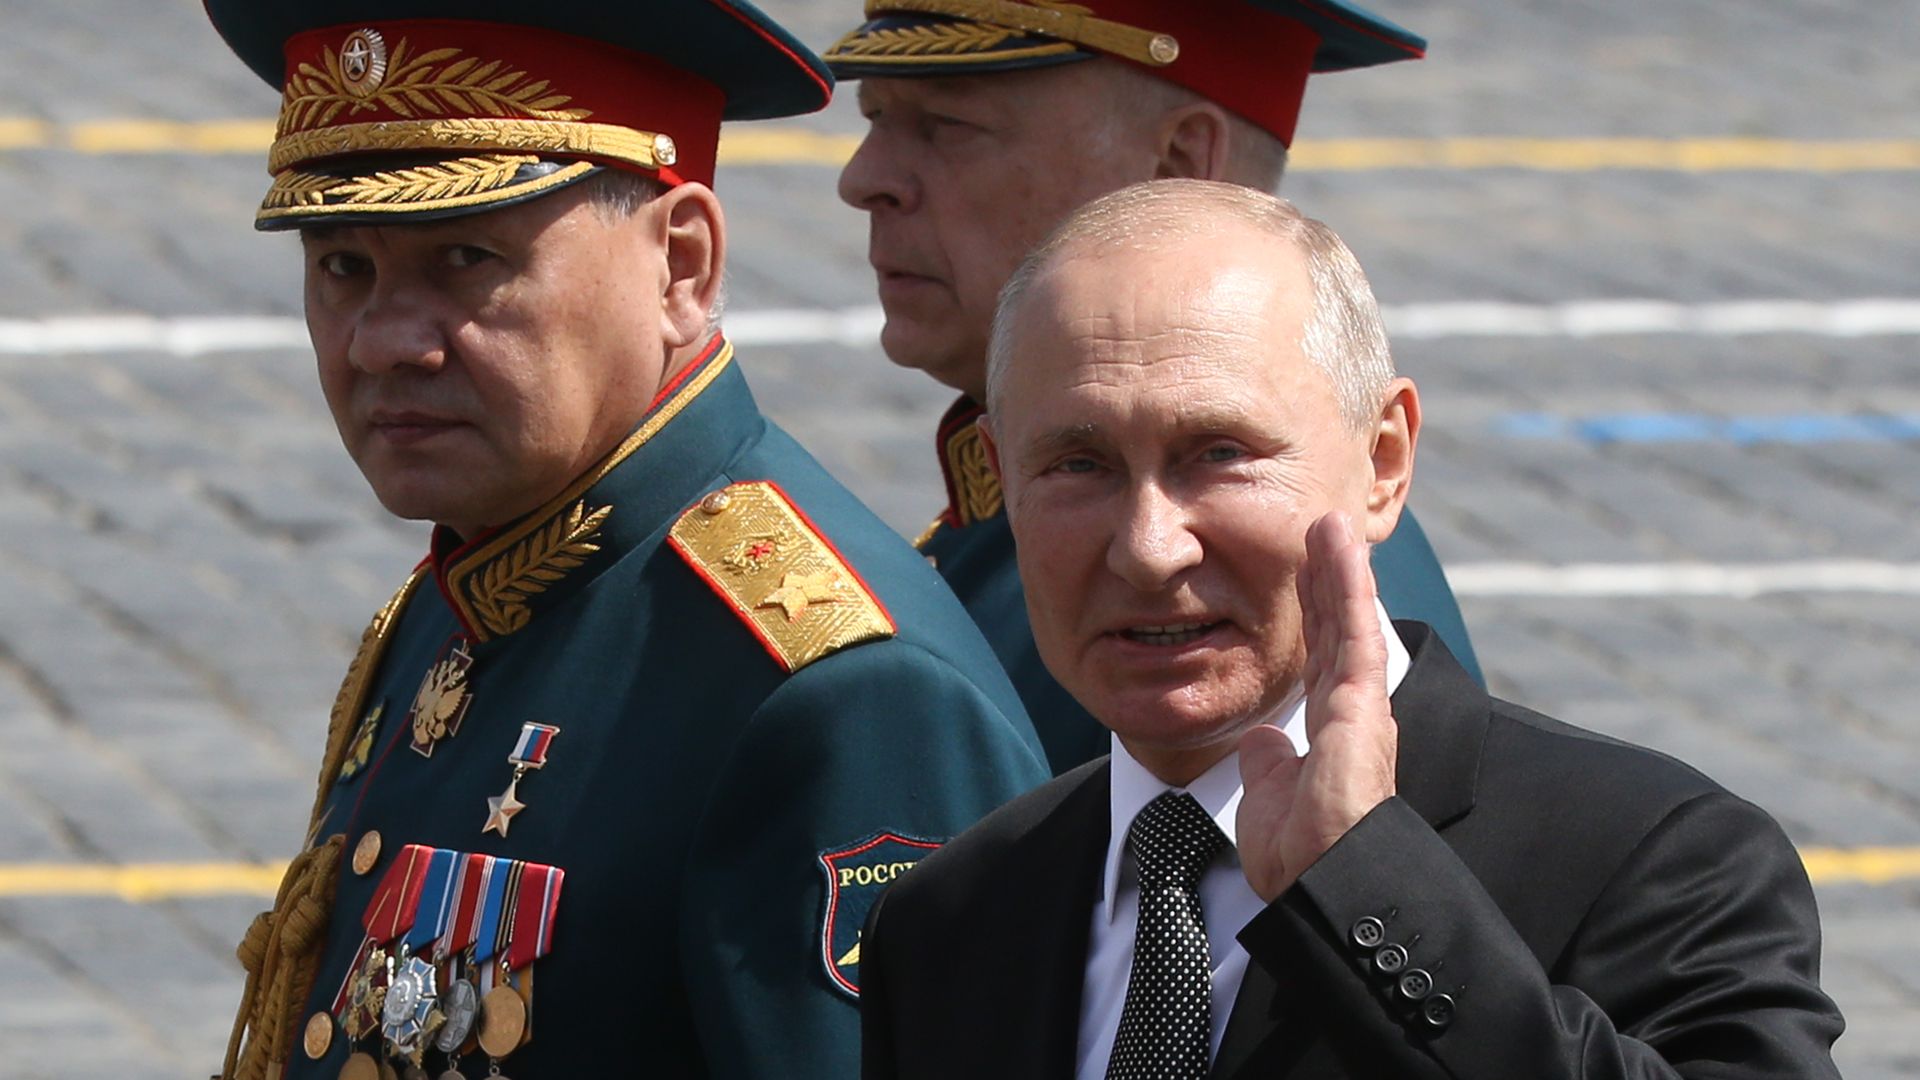 Putin with military officers